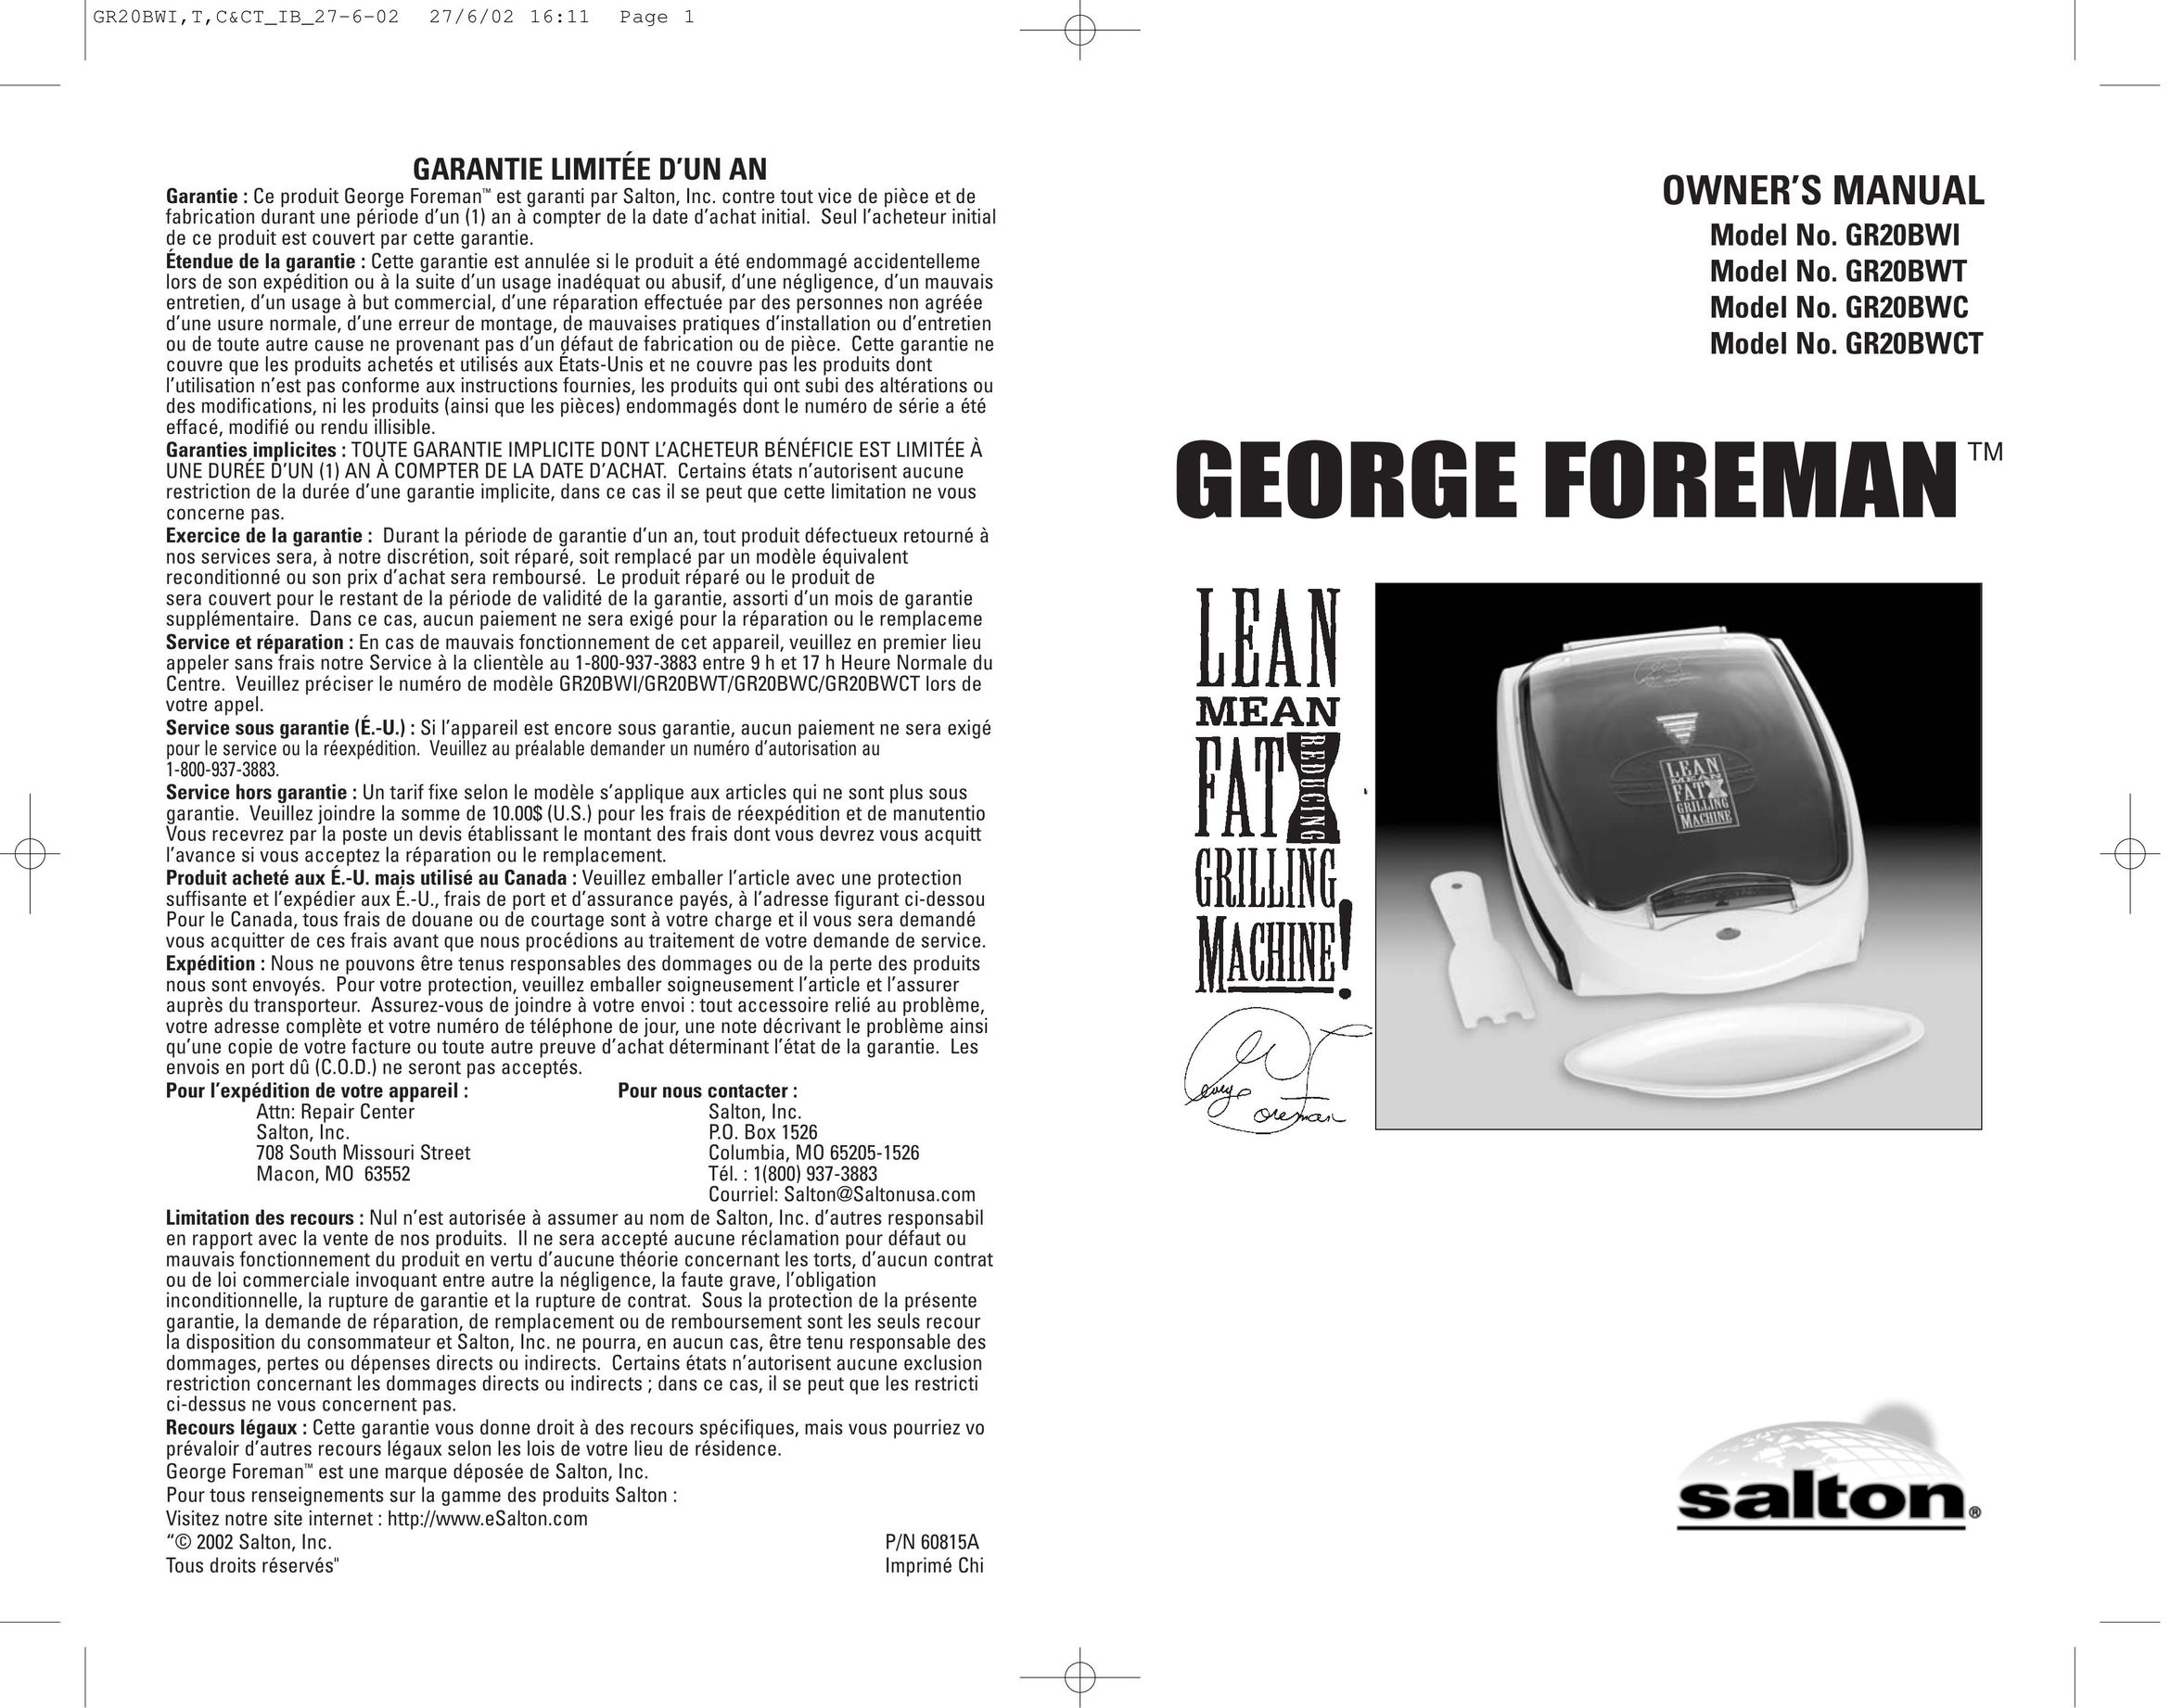 George Foreman GR20BWCT Kitchen Grill User Manual